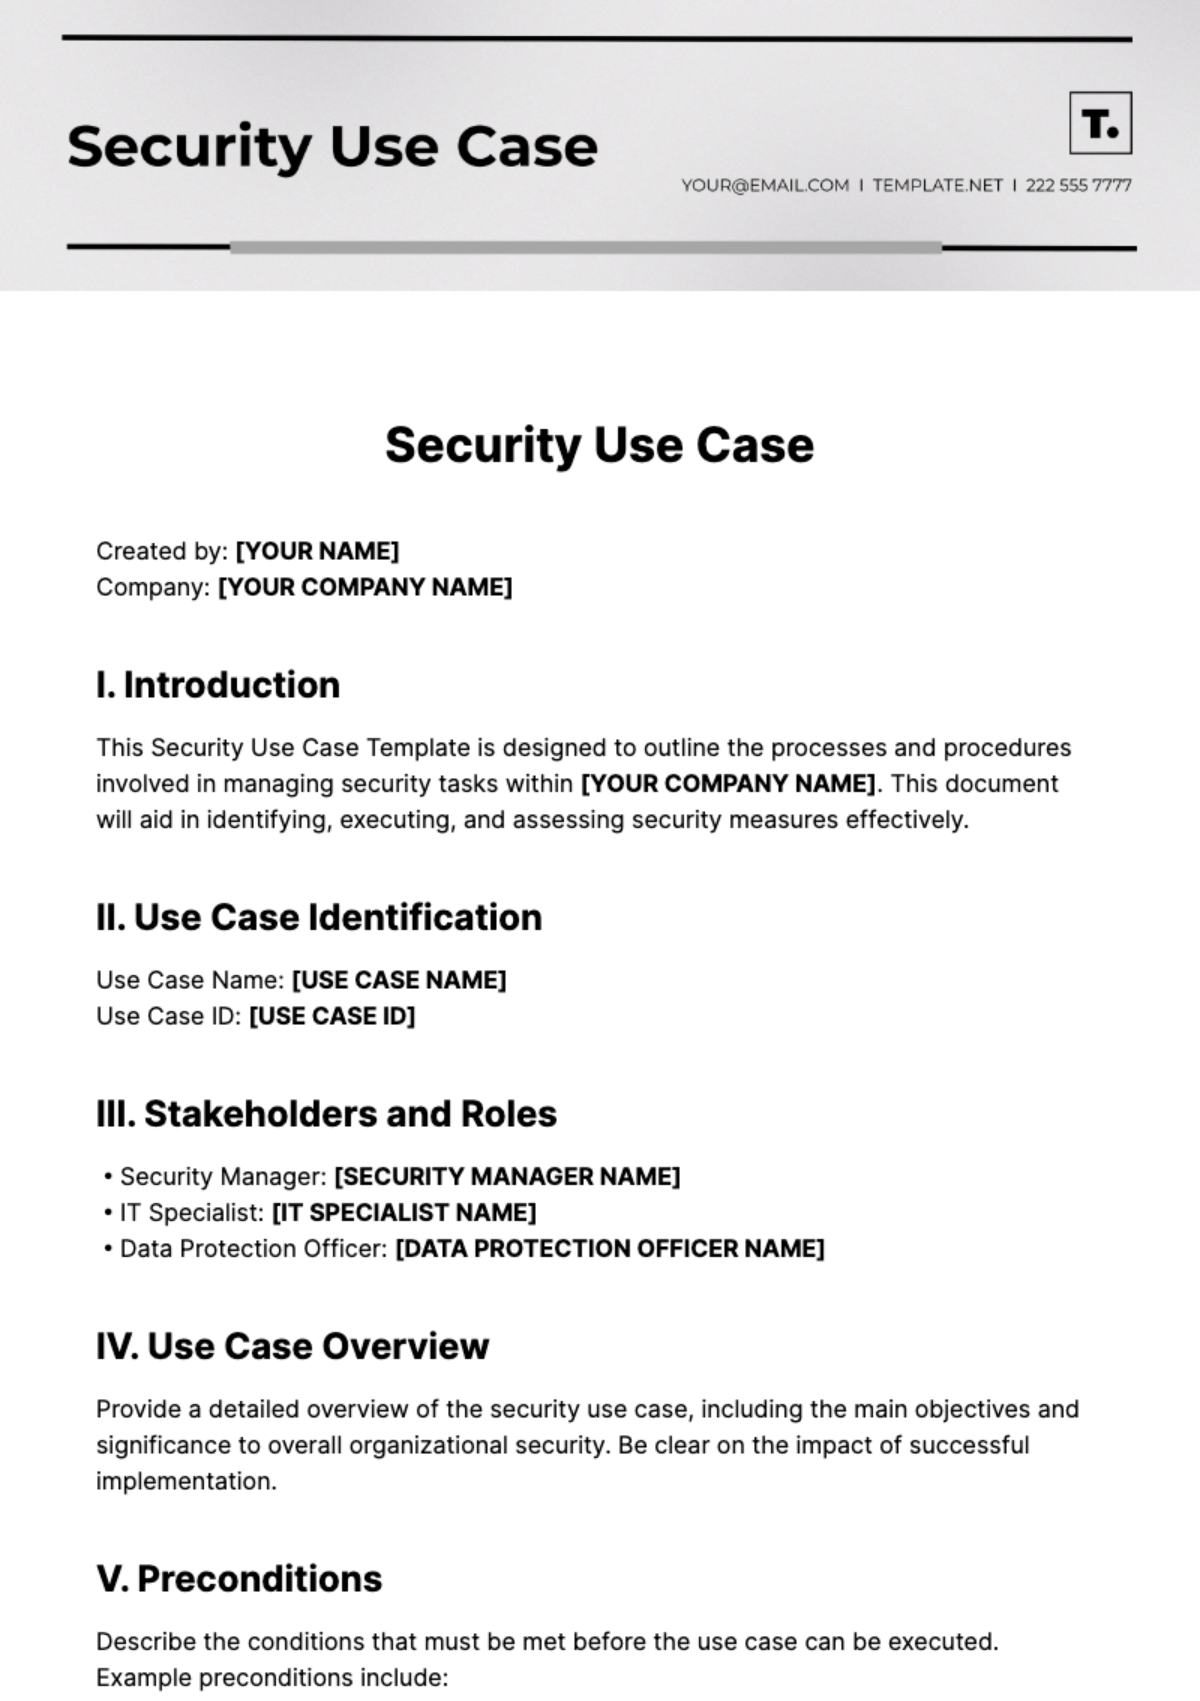 Free Security Use Case Template